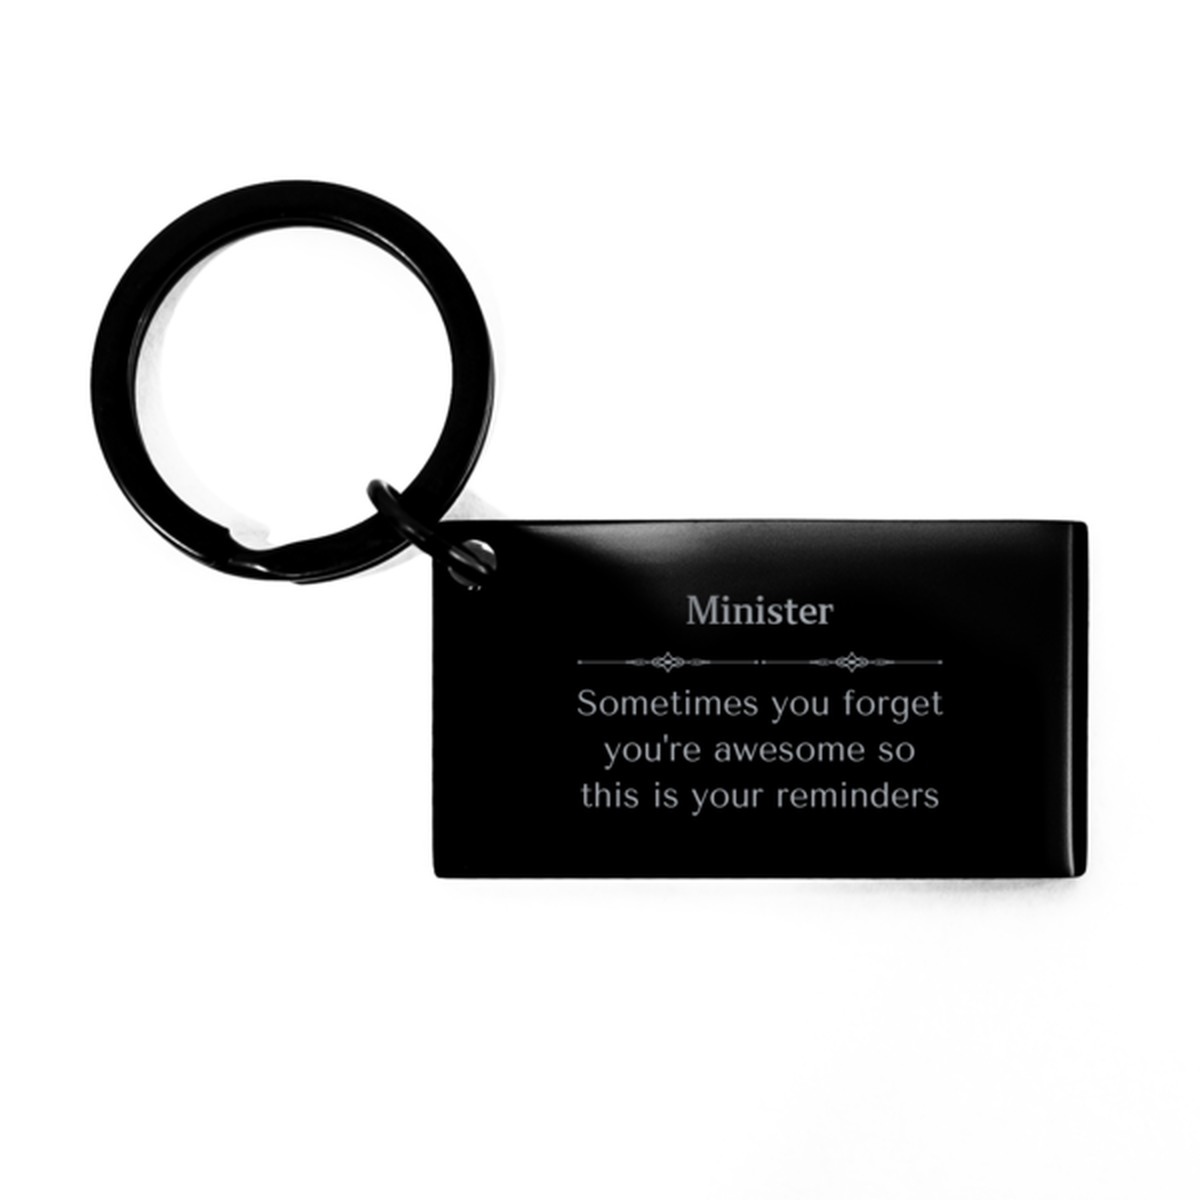 Sentimental Minister Keychain, Orthodontist Sometimes you forget you're awesome so this is your reminders, Graduation Christmas Birthday Gifts for Minister, Men, Women, Coworkers